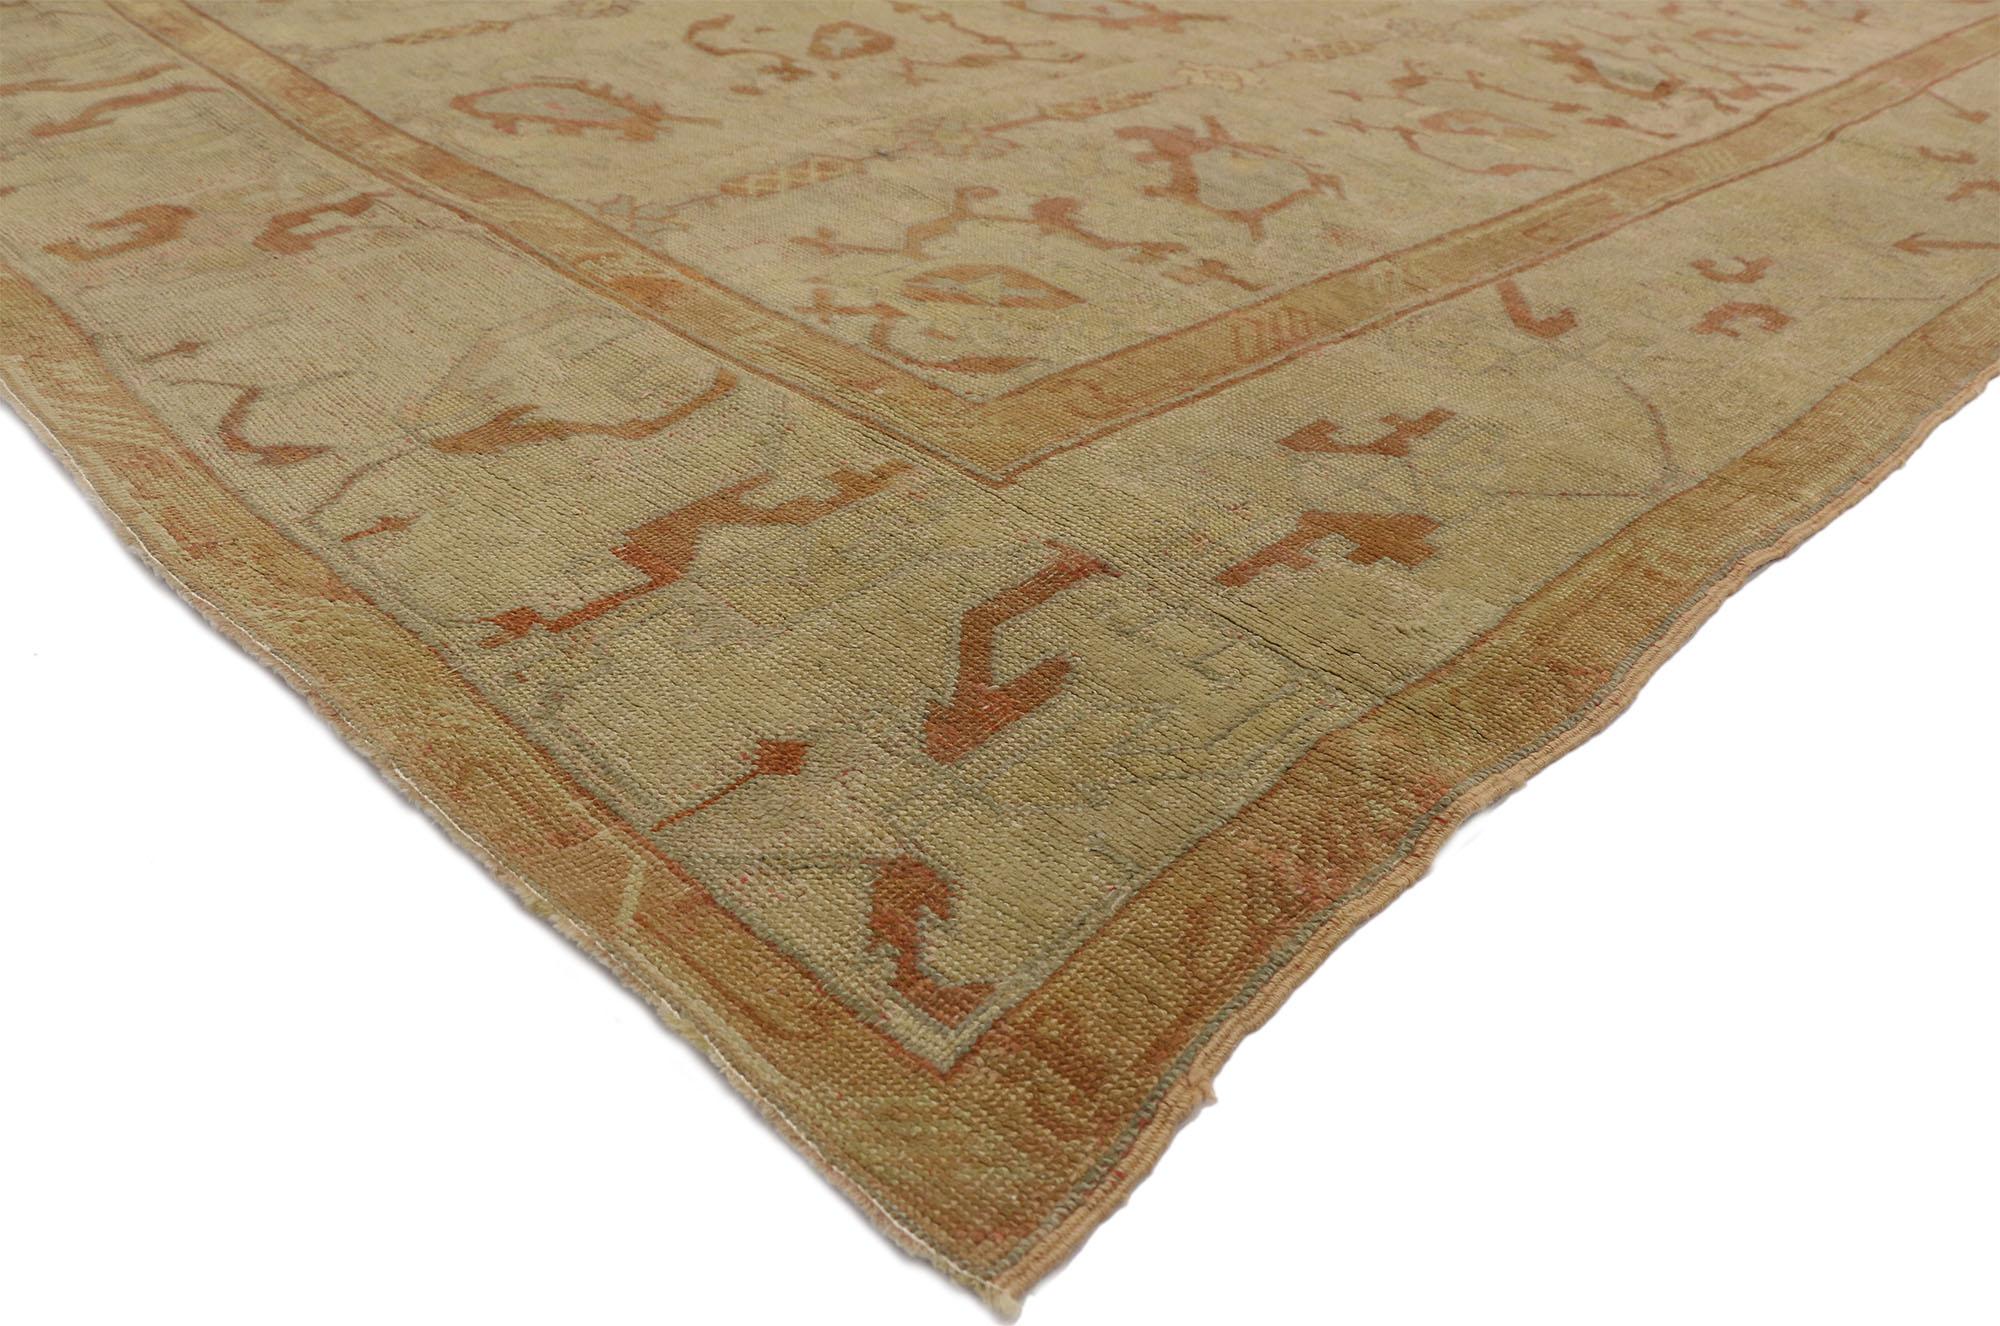 73736, antique Turkish Oushak rug with rustic Arts & Crafts style 10'00 x 12'00. With its architectural elements of naturalistic forms and lovingly time-worn patina, this hand knotted wool antique Turkish Oushak rug beautifully embodies Arts and